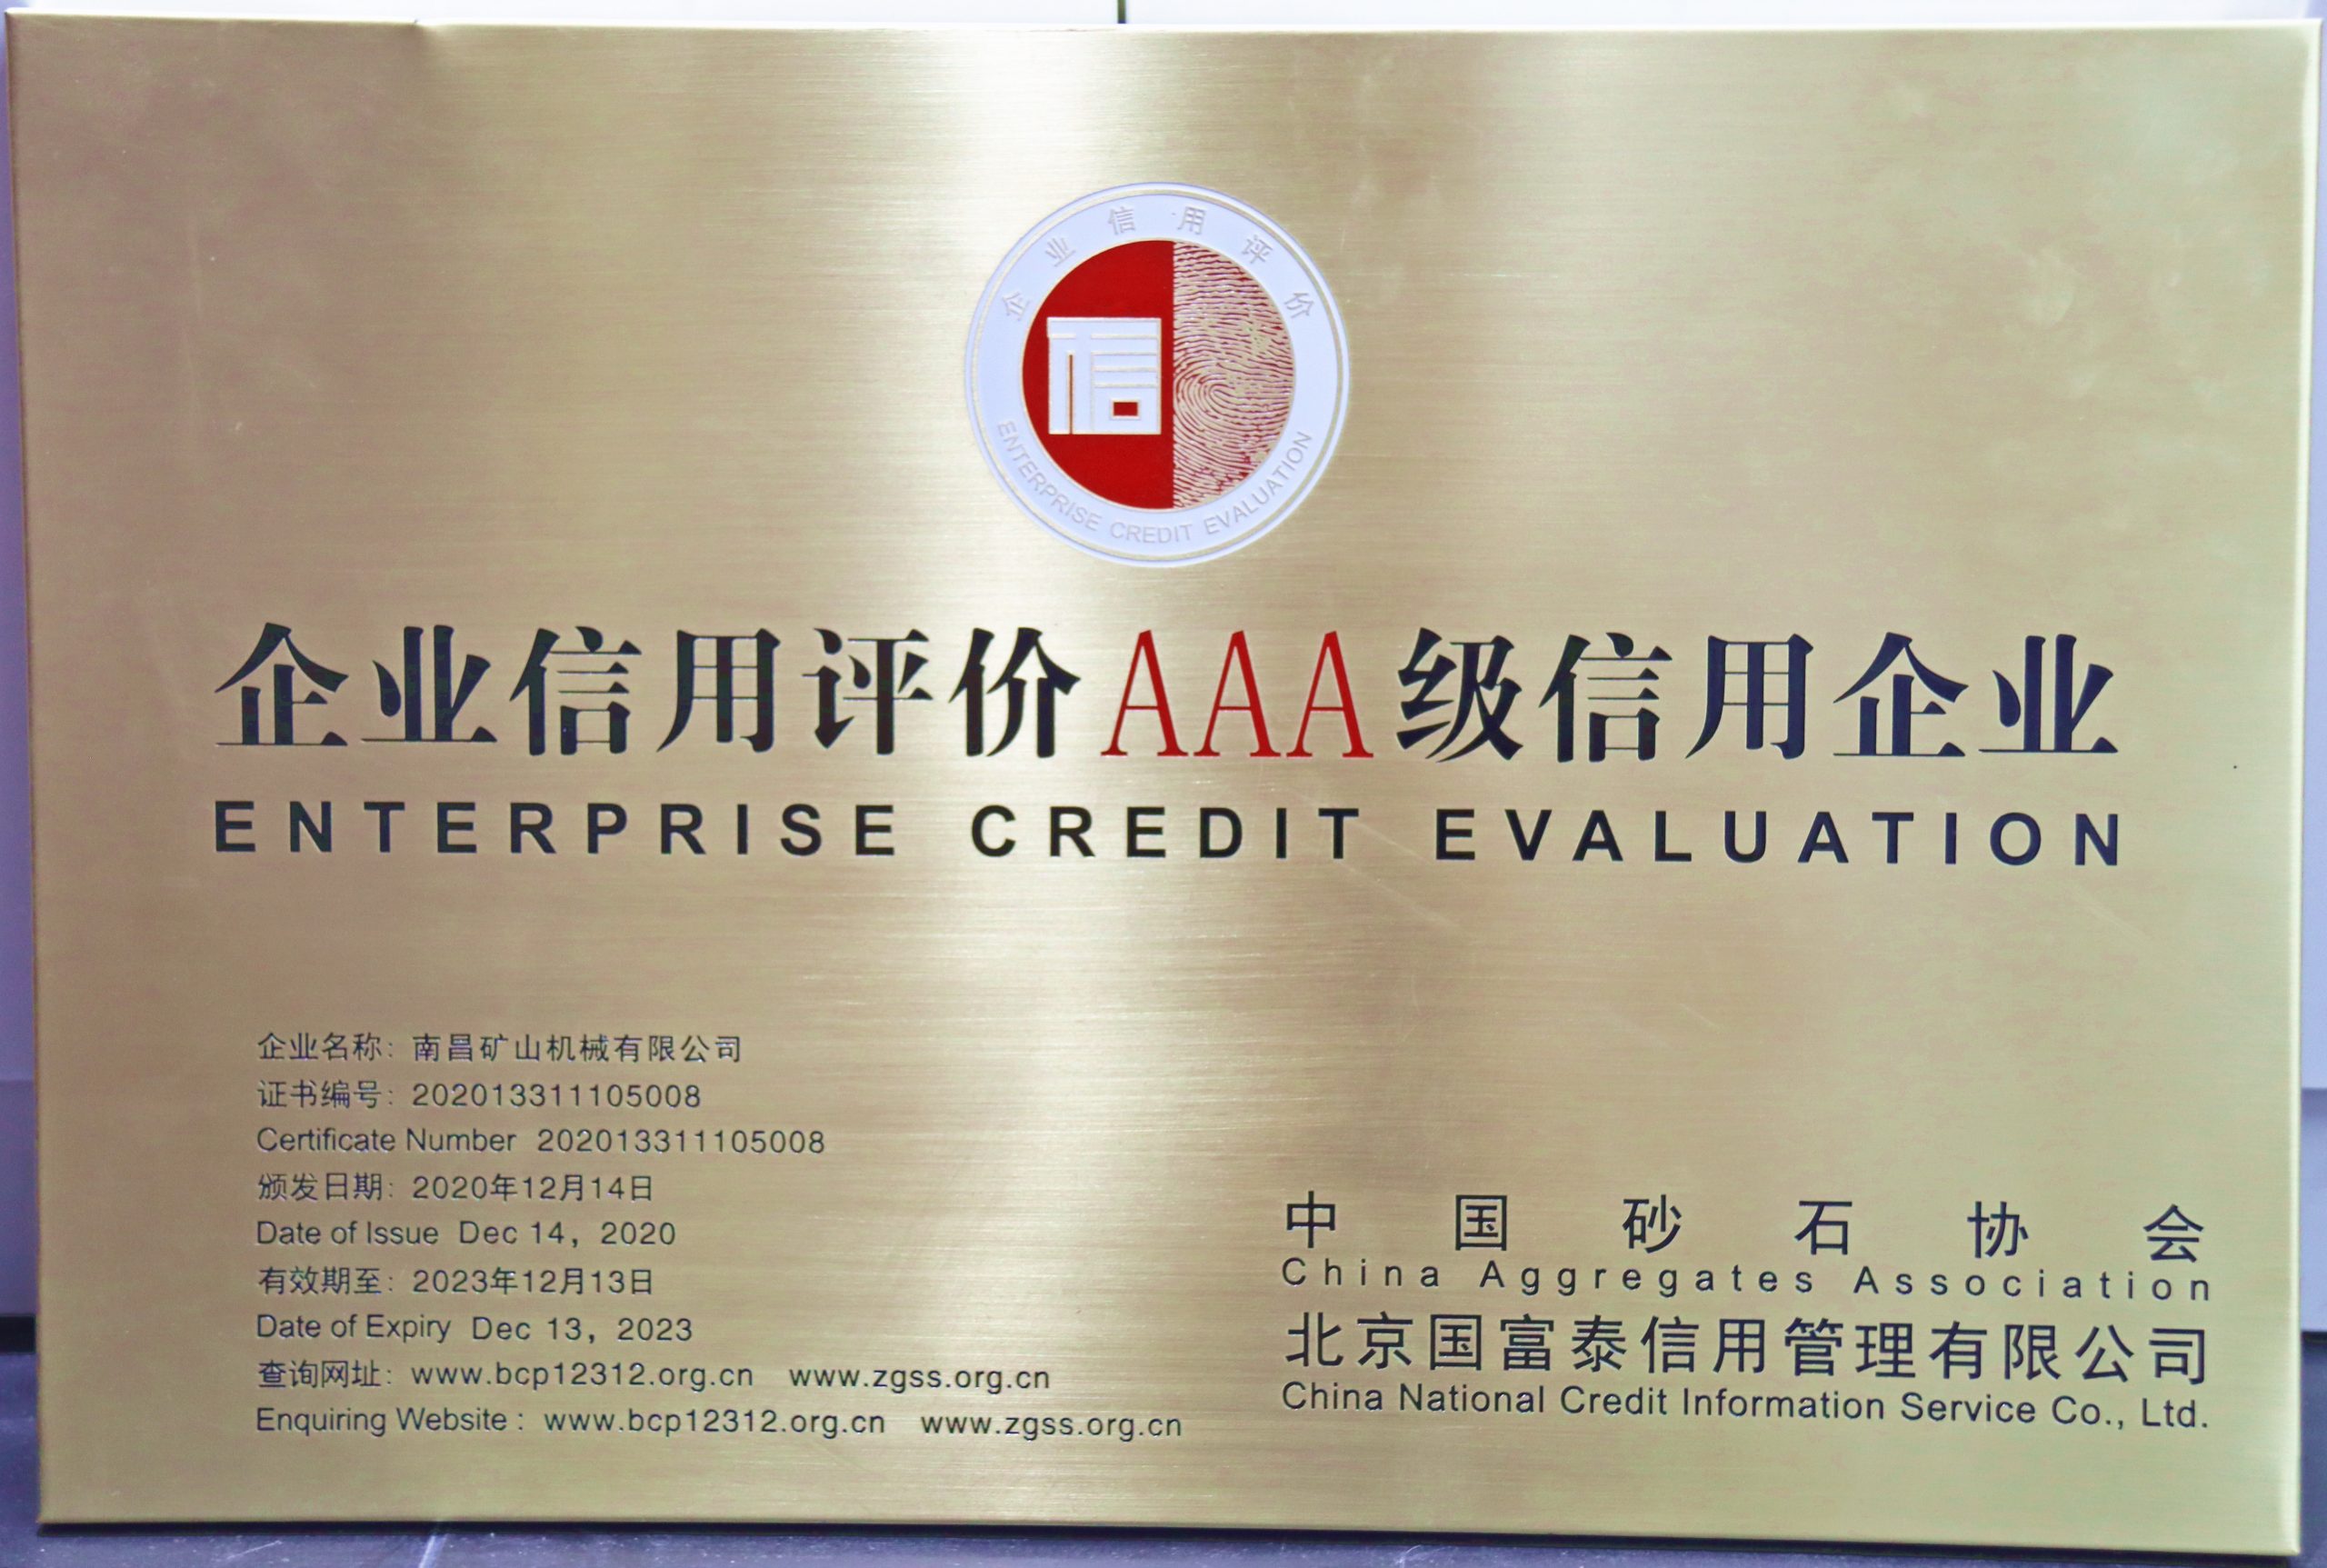 Enterprise Credit AAA by China Aggregates Association